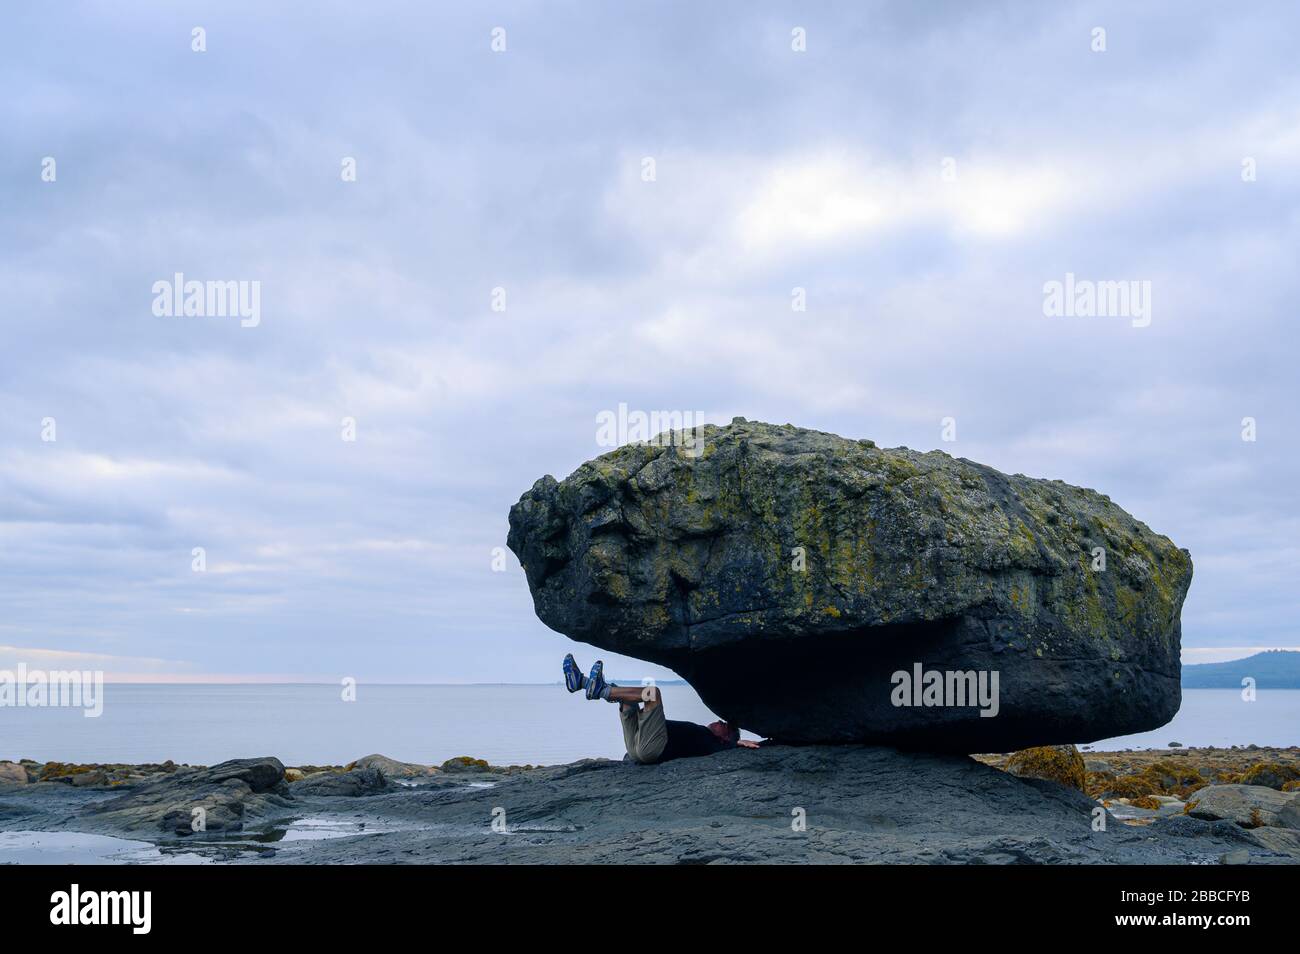 Man plays like being trapped inder Balance Rock, Skidegate, Haida Gwaii, Formerly known as Queen Charlotte Islands, British Columbia, Canada Stock Photo